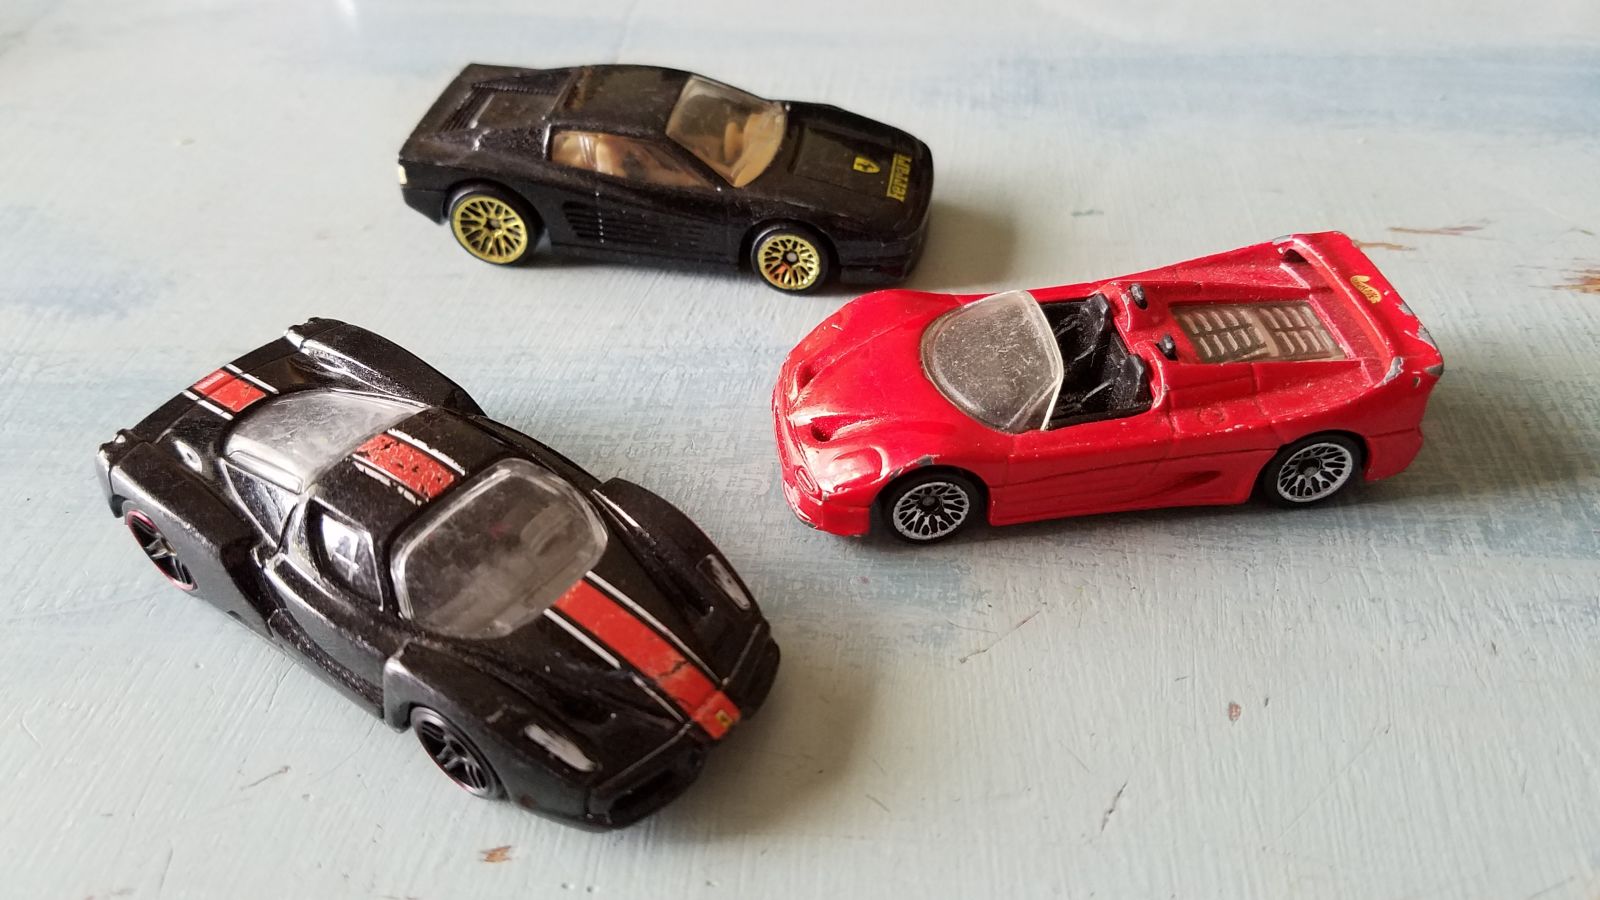 The Ferraris. All playworn to various degrees. The Testarossa is in the best condition of the three. Then the F50. And the Enzo last. I’m going to leave the Testarossa as is, but the F50 and Enzo will be going to the workbench to be refreshed. 